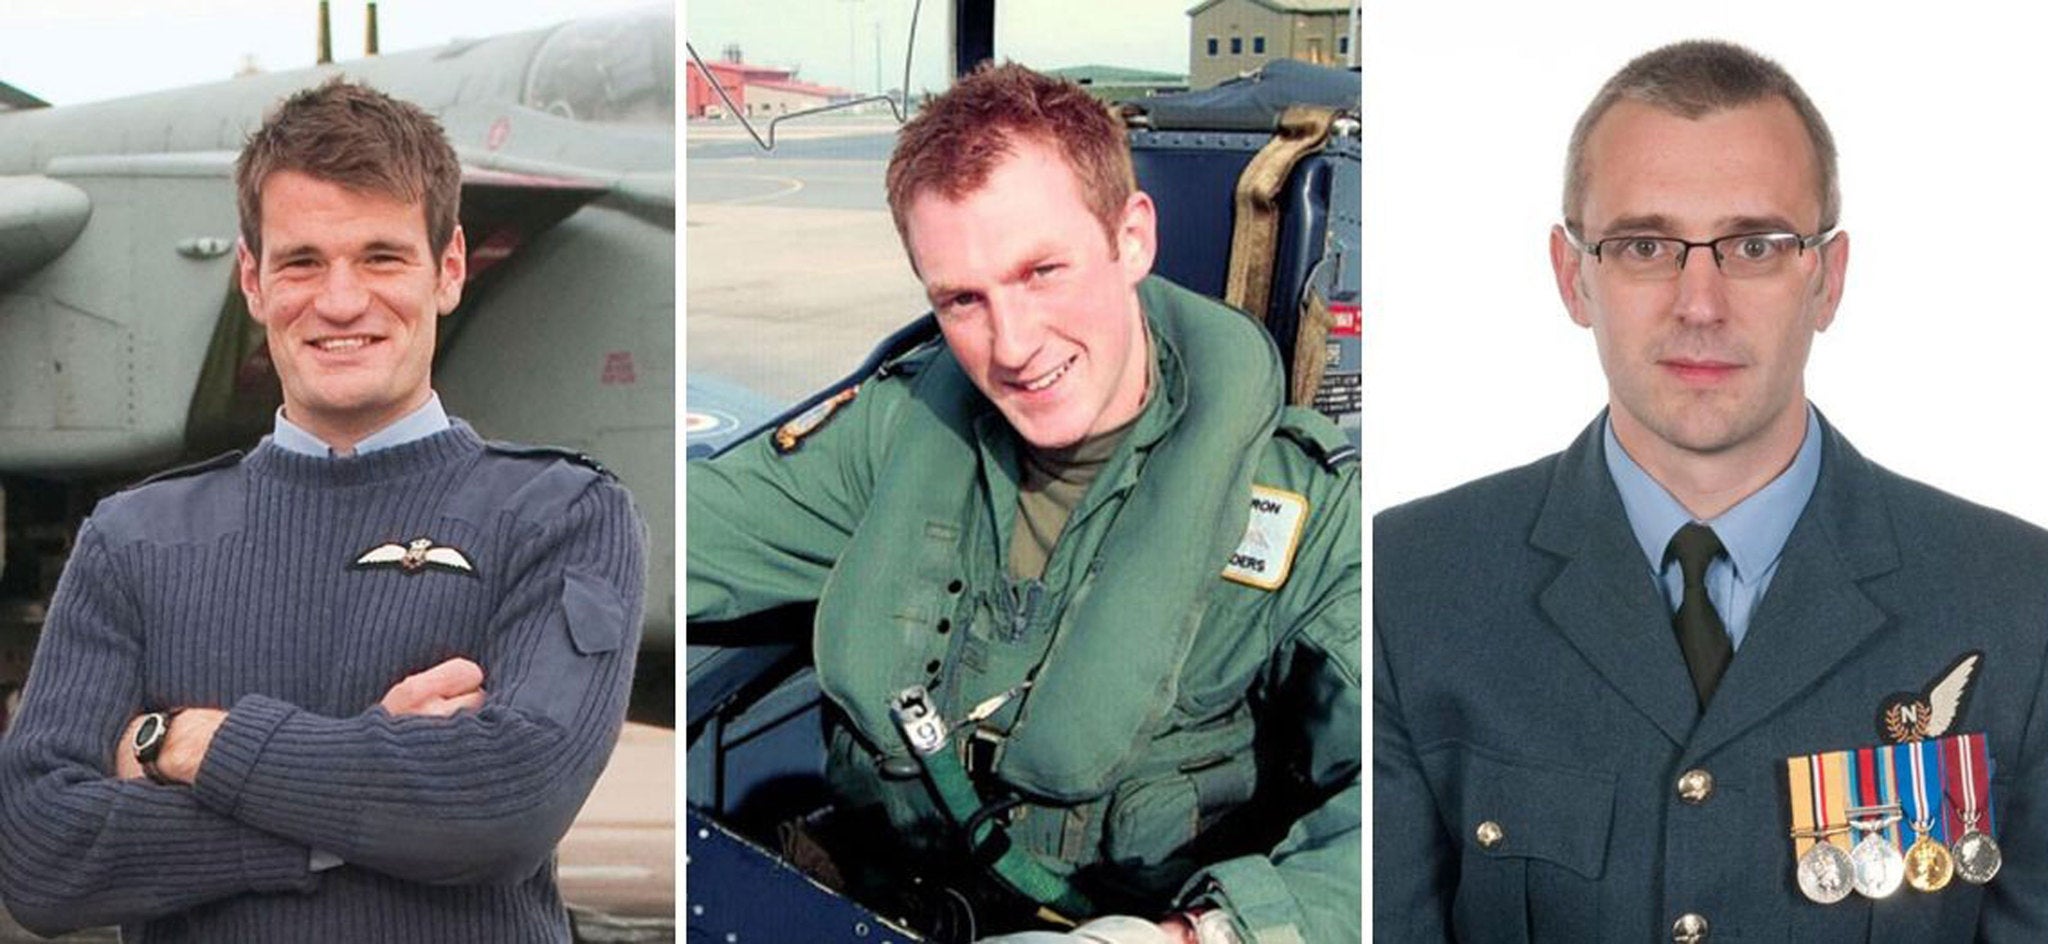 Flight Lieutenant Hywel Poole (left), Flight Lieutenant Adam Sanders (centre) and Squadron Leader Samuel Bailey who all died in the accident